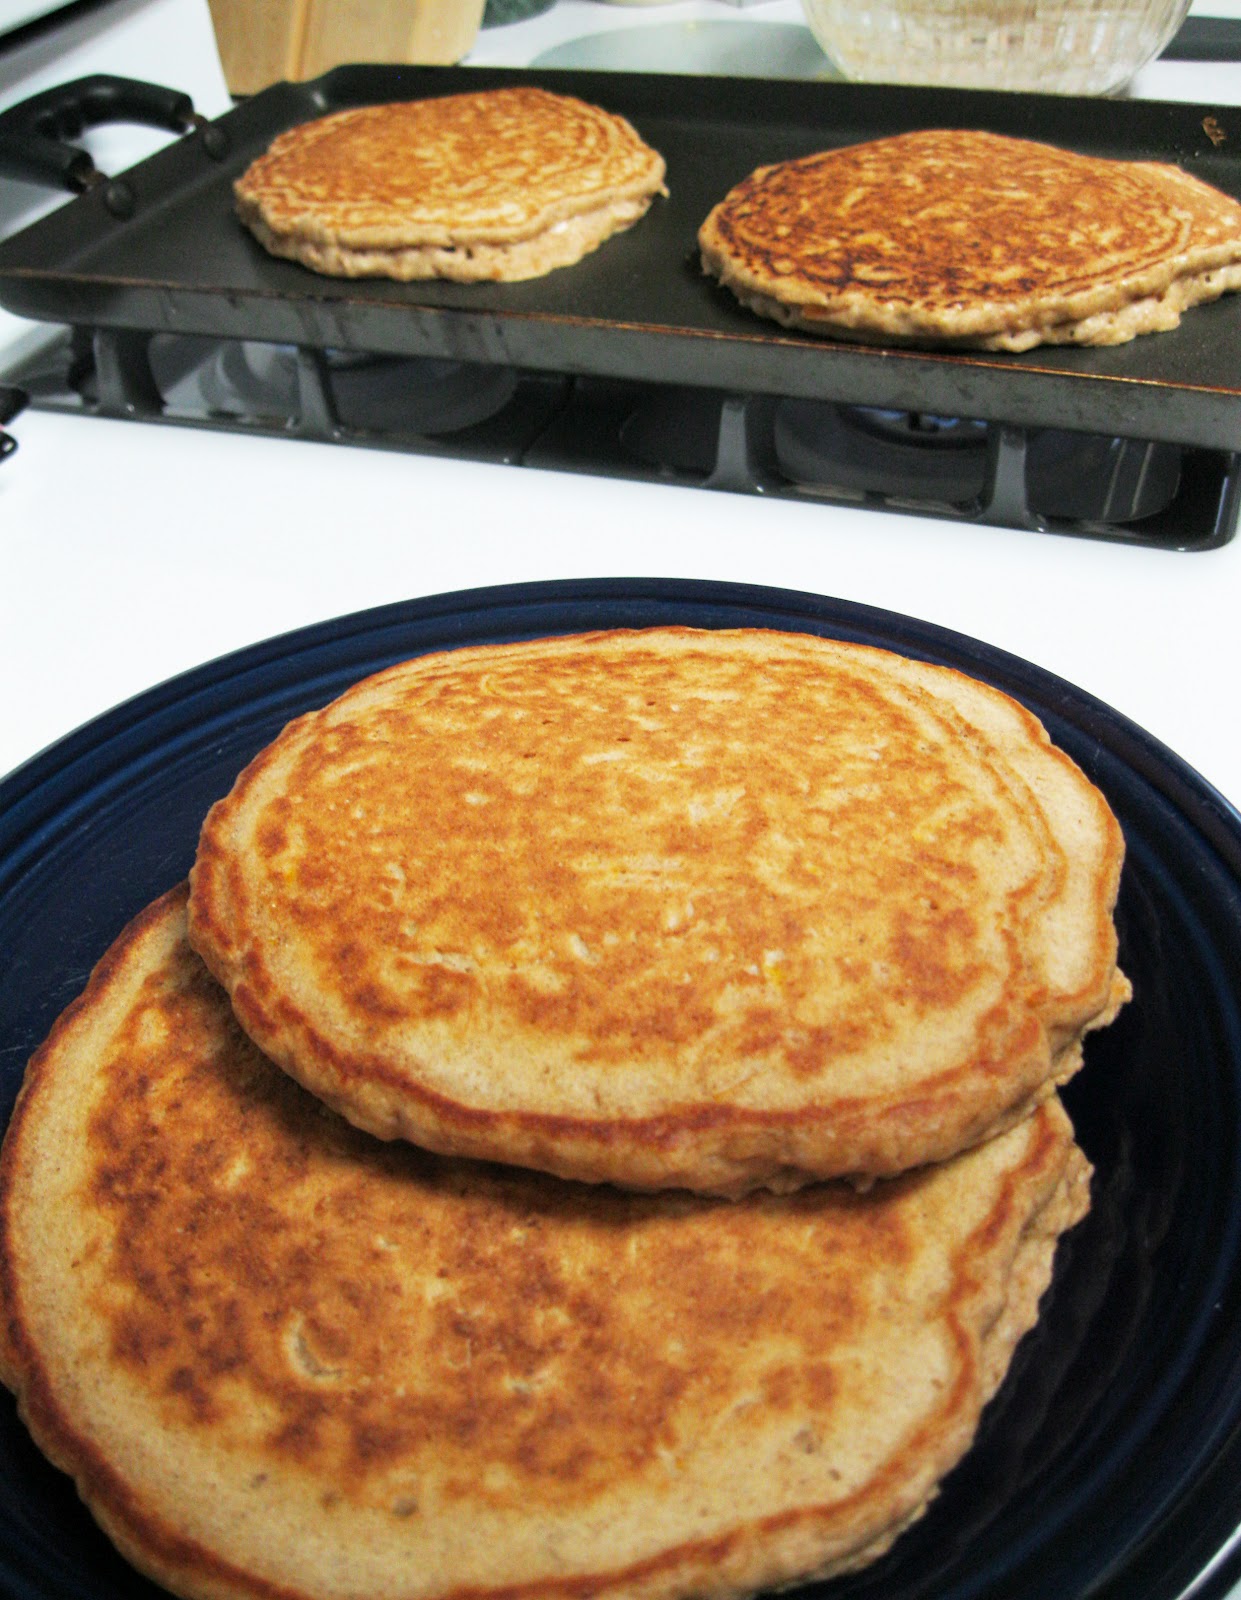 Now how  breakfast? pancakes  pretty make was were pancakes just flour tasty said pastry with  for This who to